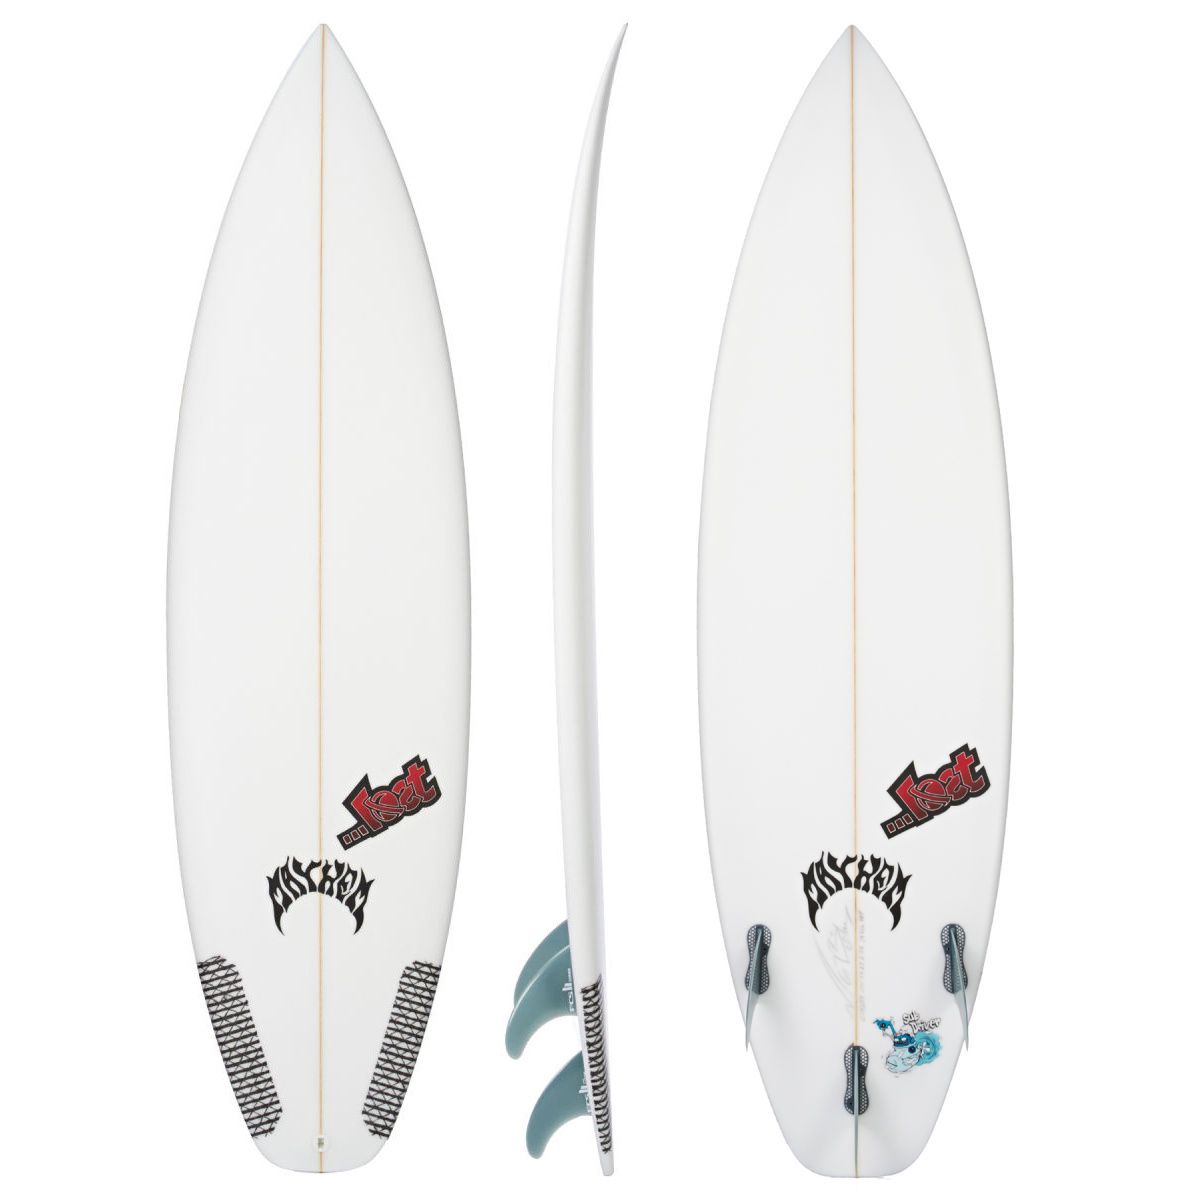 lost surfboards lost sub driver fcsii surfboard 2015 model white